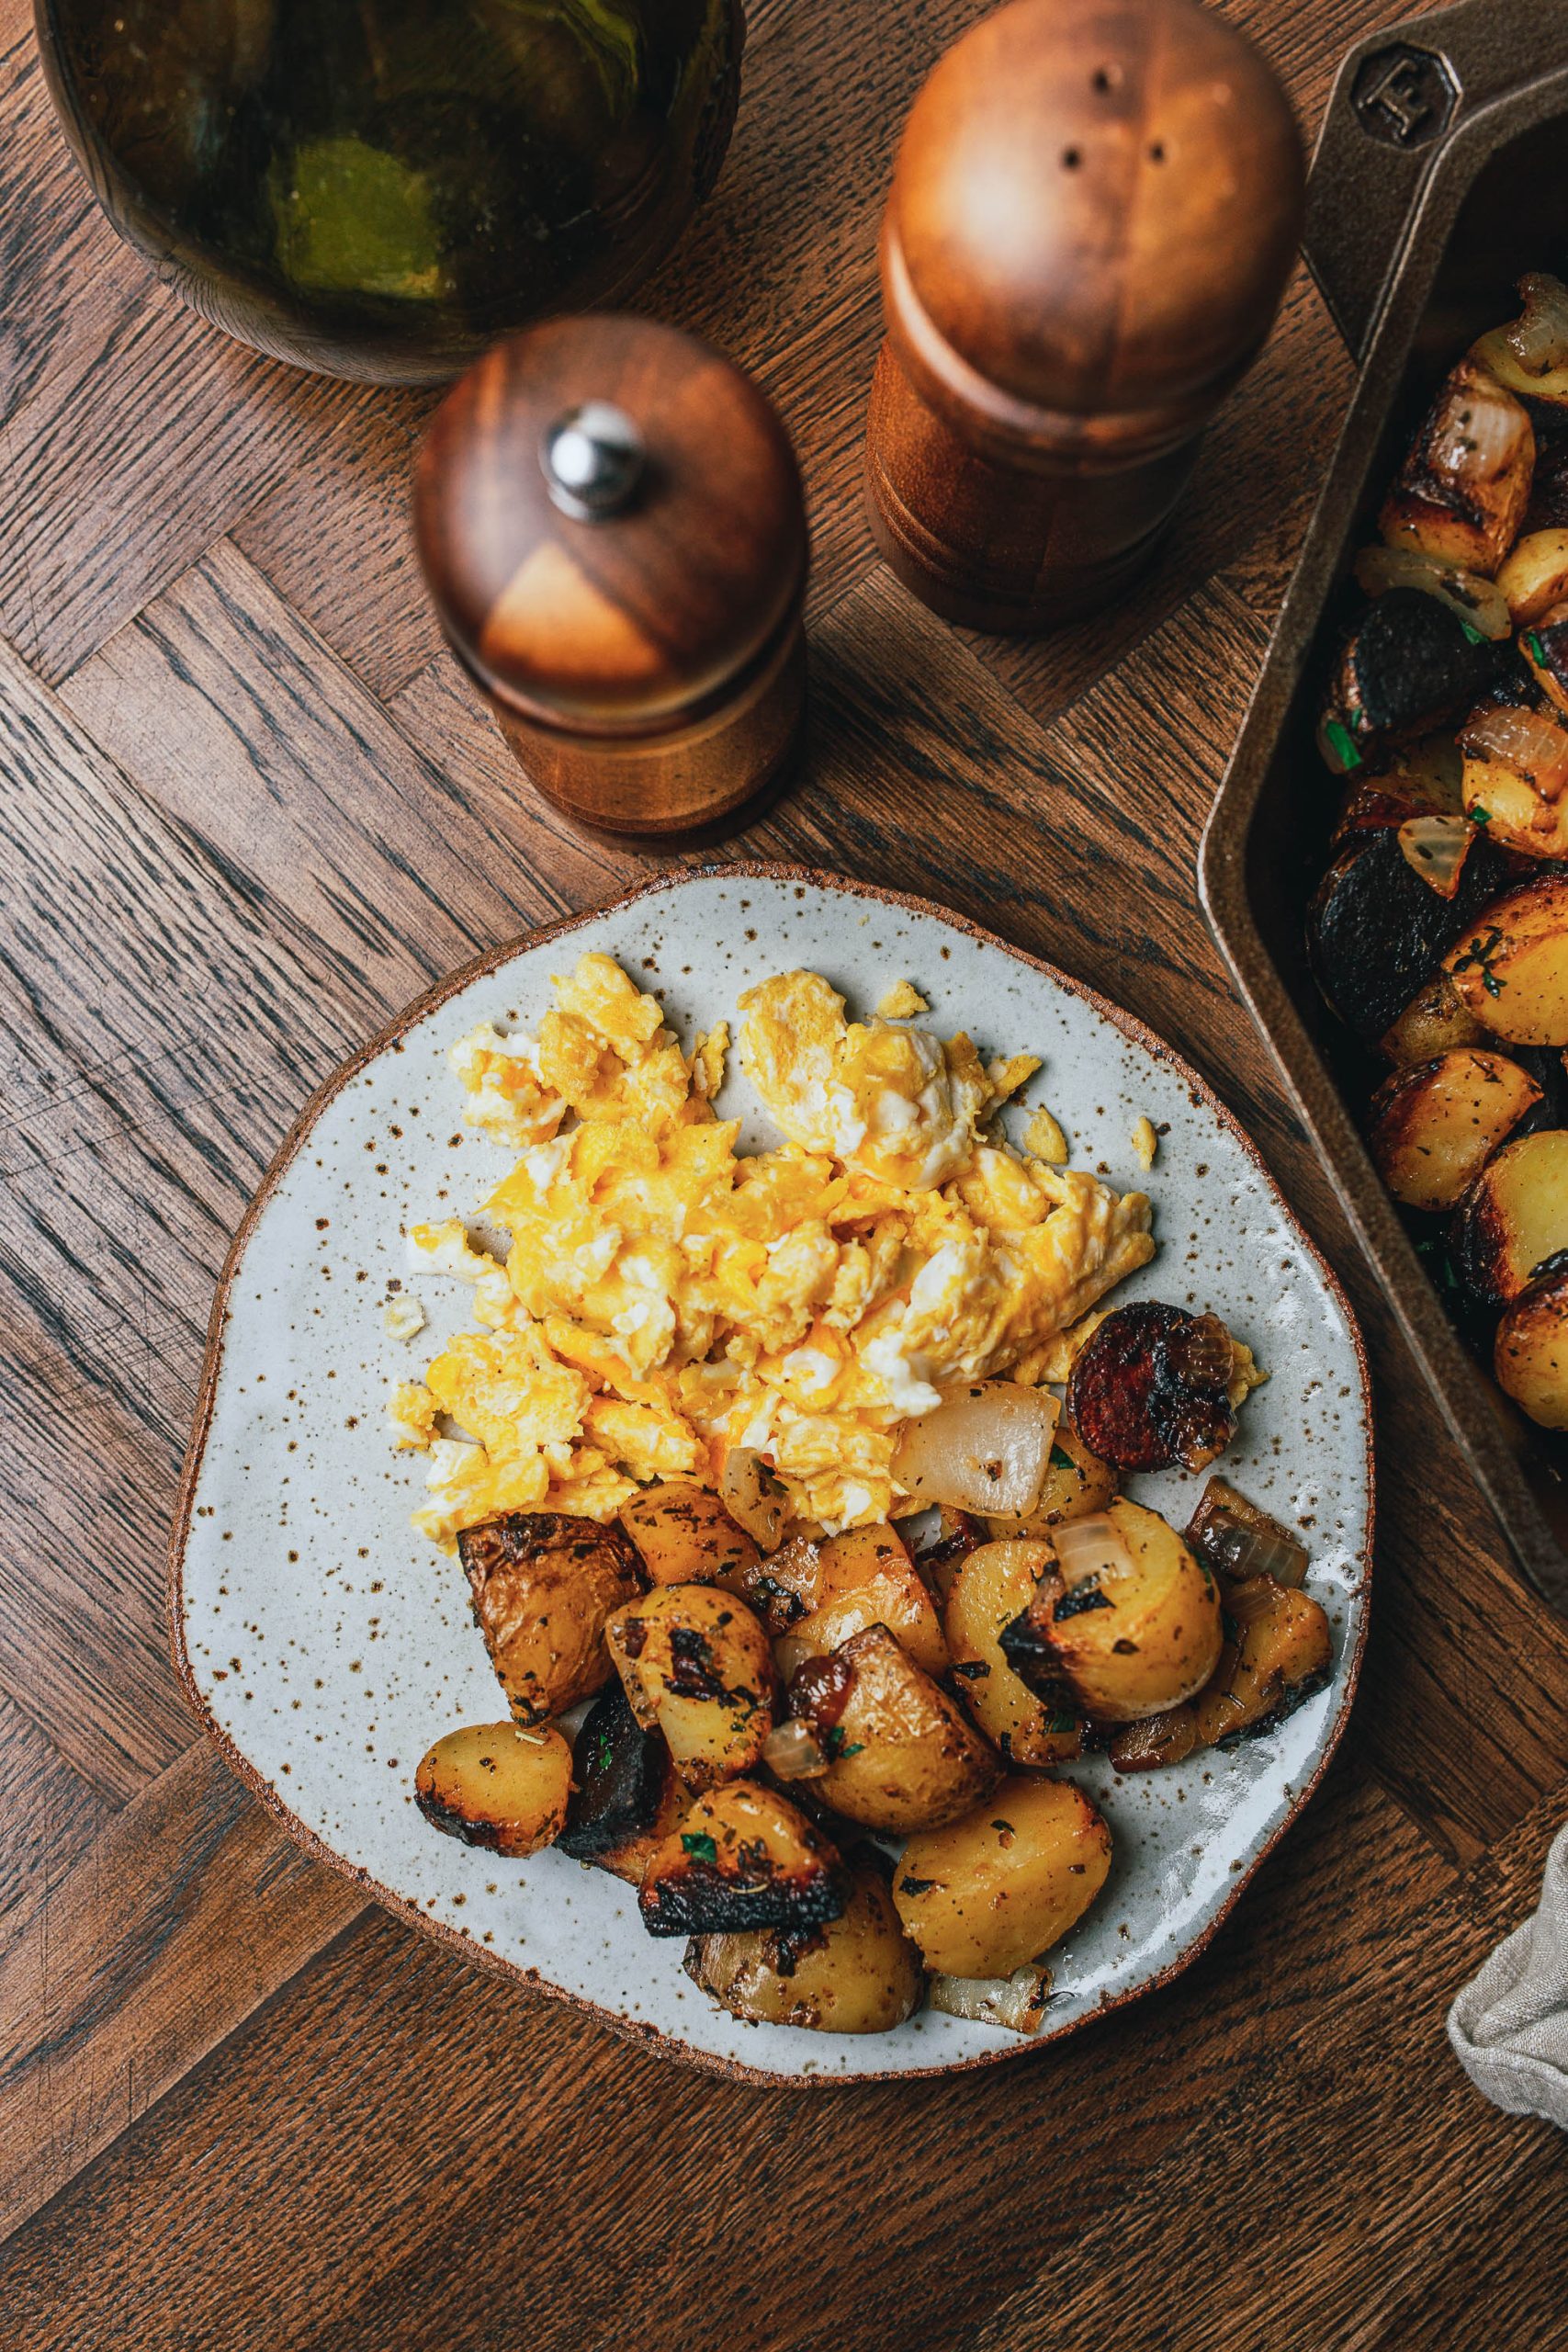 A plate of scrambled eggs and roasted potatoes on a wooden table with a pepper grinder and salt shaker nearby.